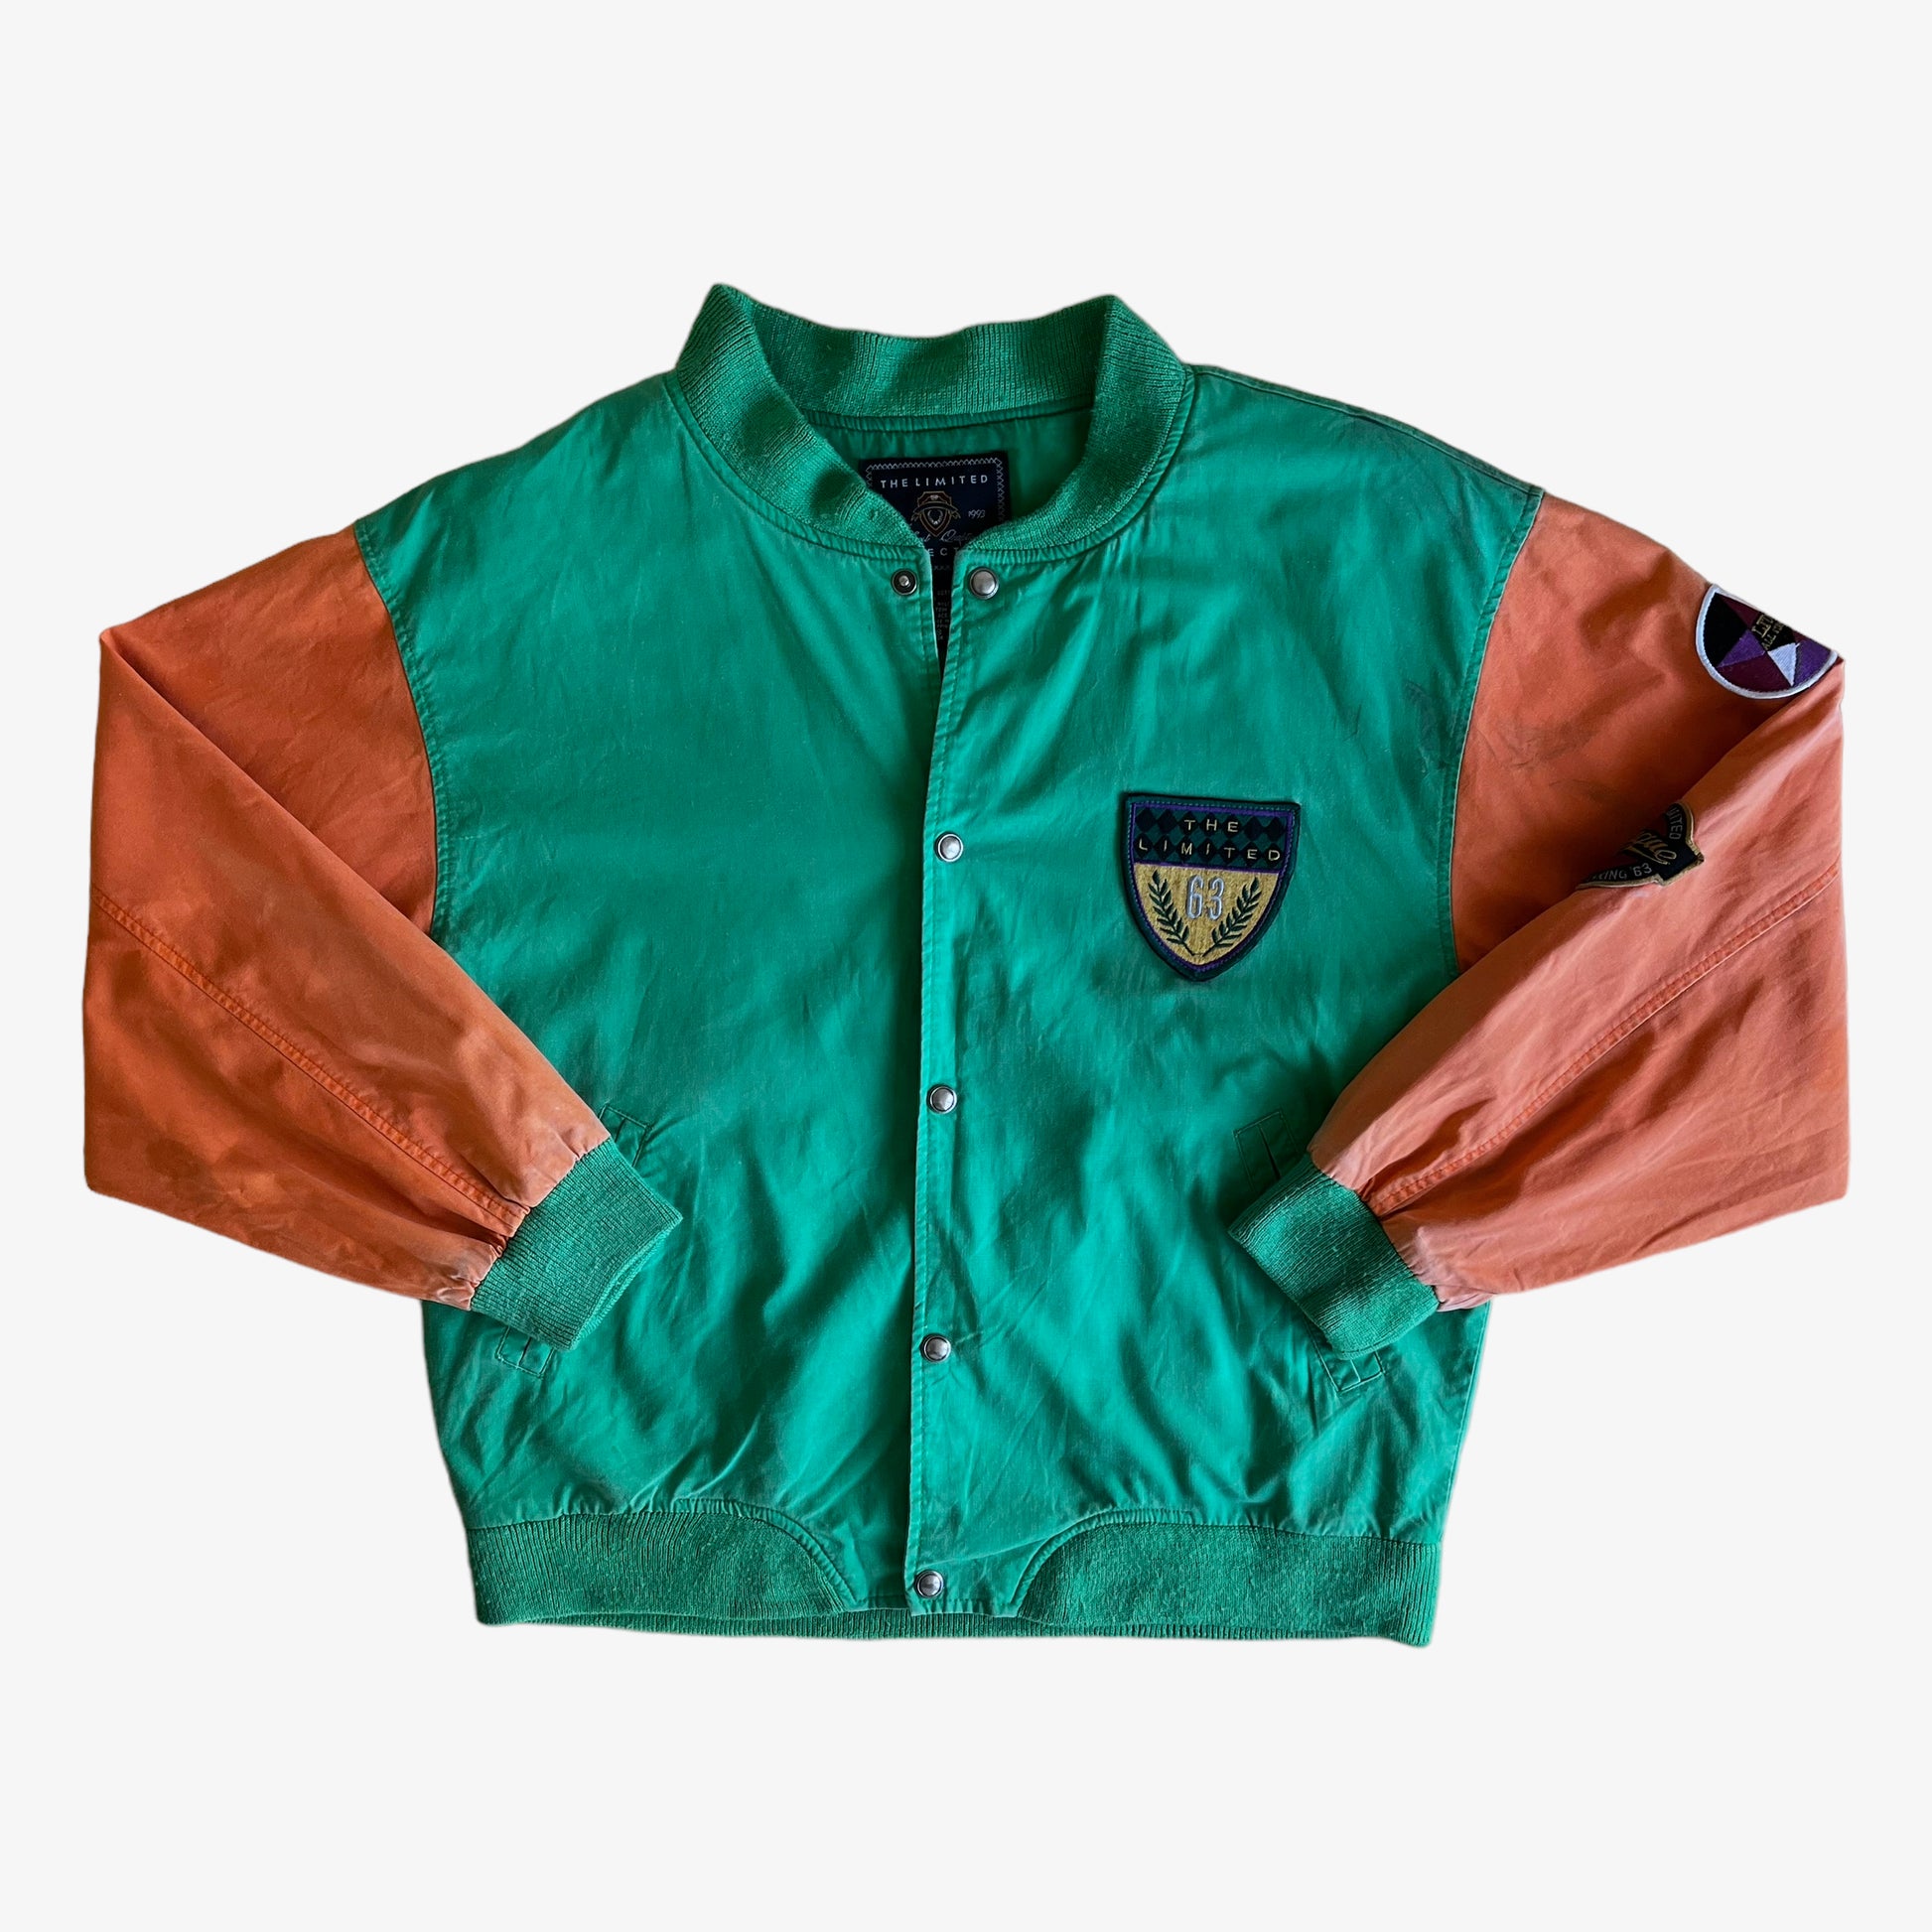 Vintage 90s The Limited Green And Orange Varsity Jacket - Casspios Dream